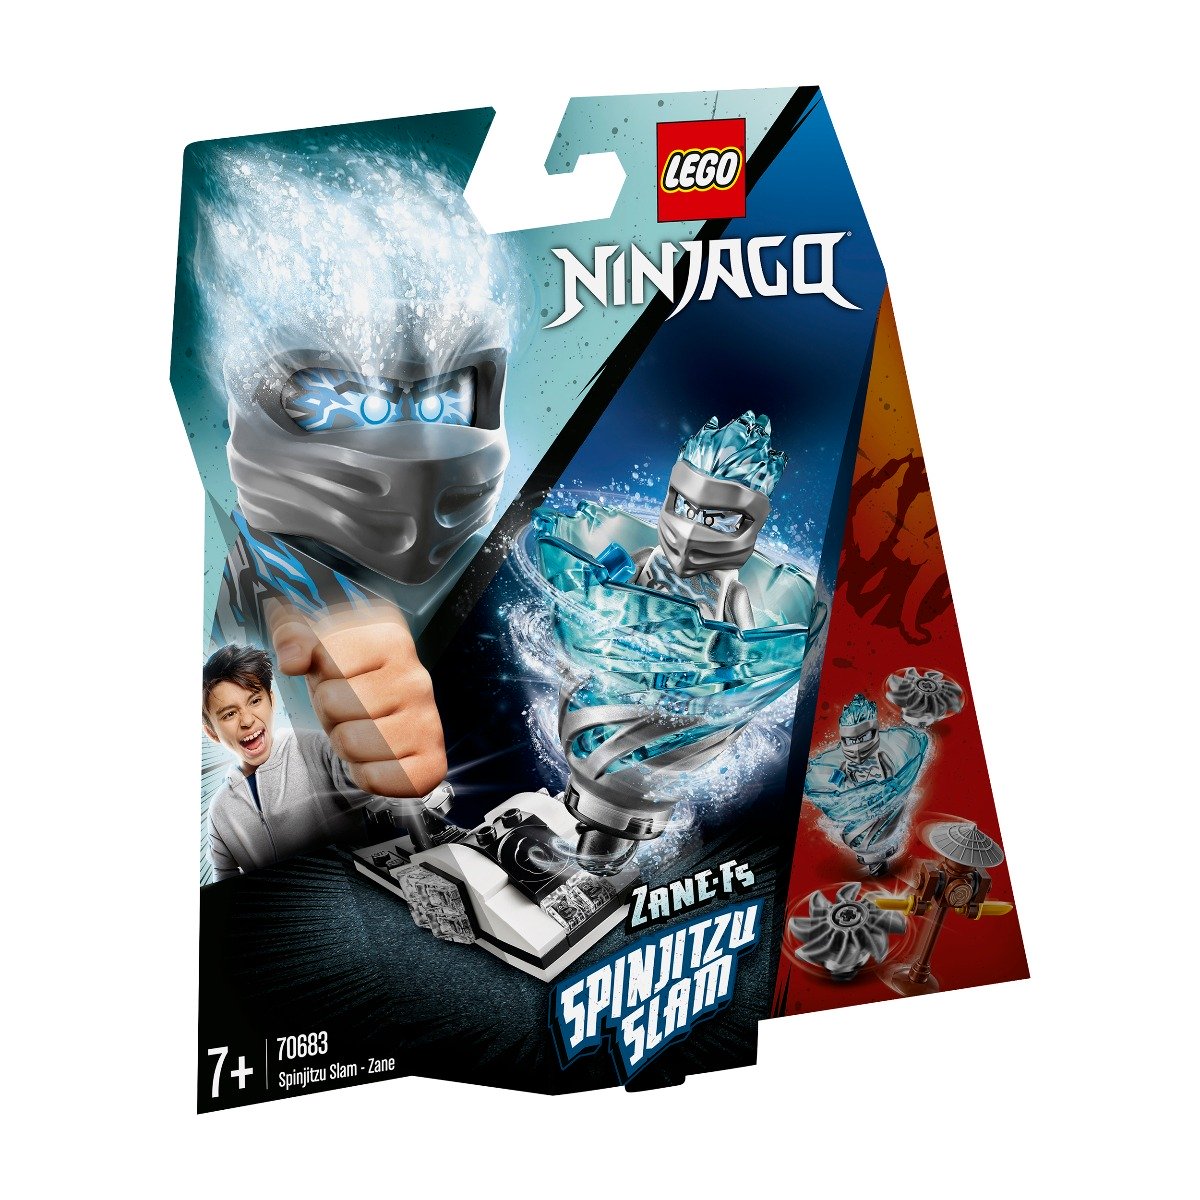 North America circulation Bloodstained Reduceri Lego iulie 2022 - Fundeal.ro